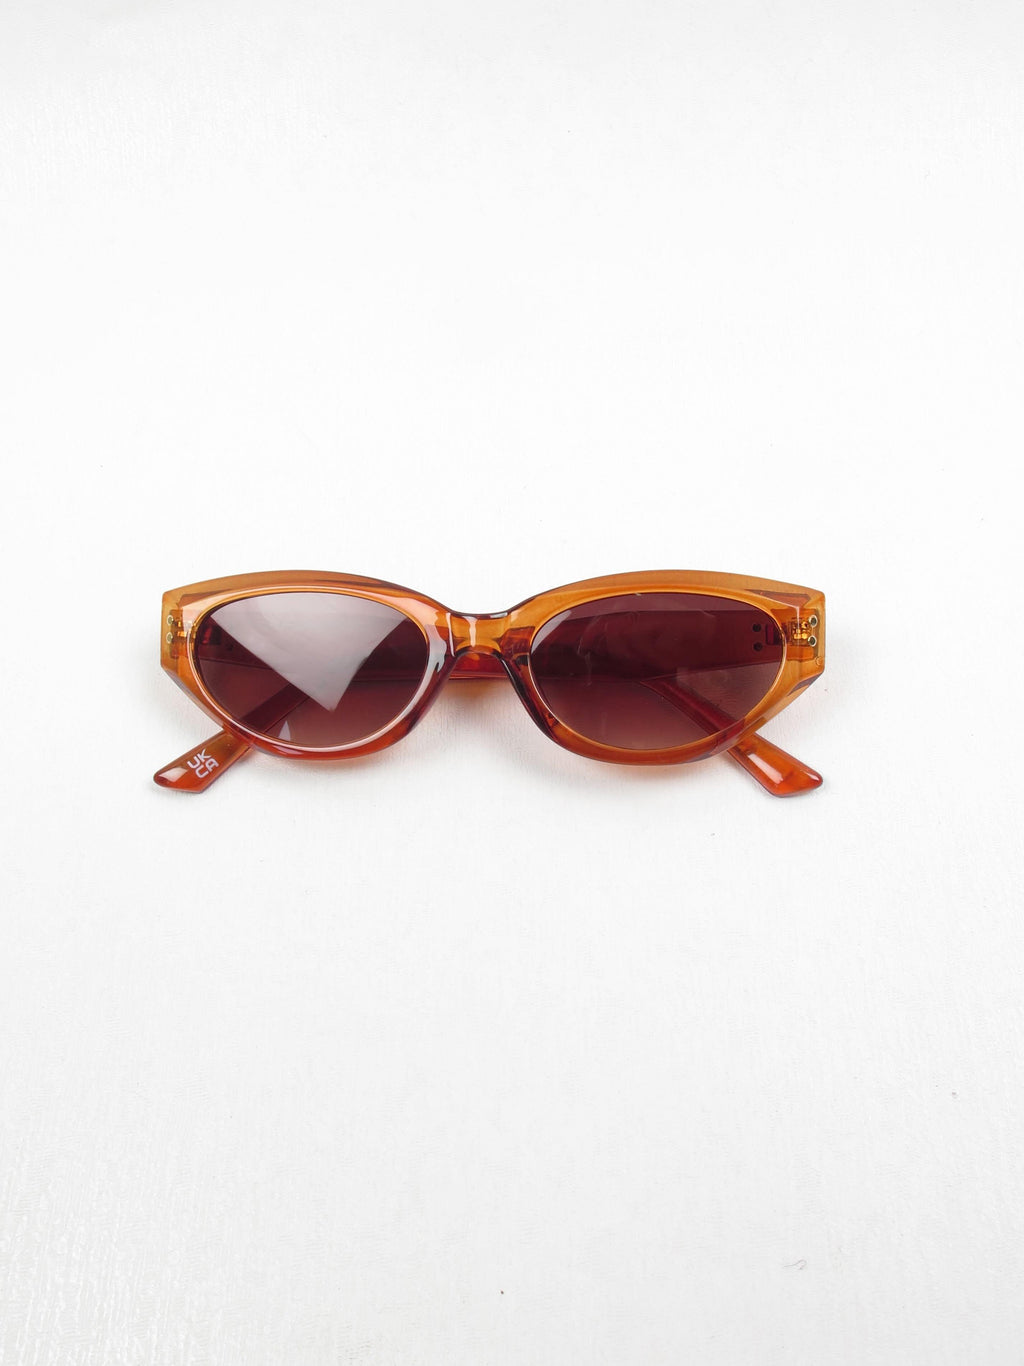 Women's Vintage Style Peggy Oval Sunglasses - The Harlequin